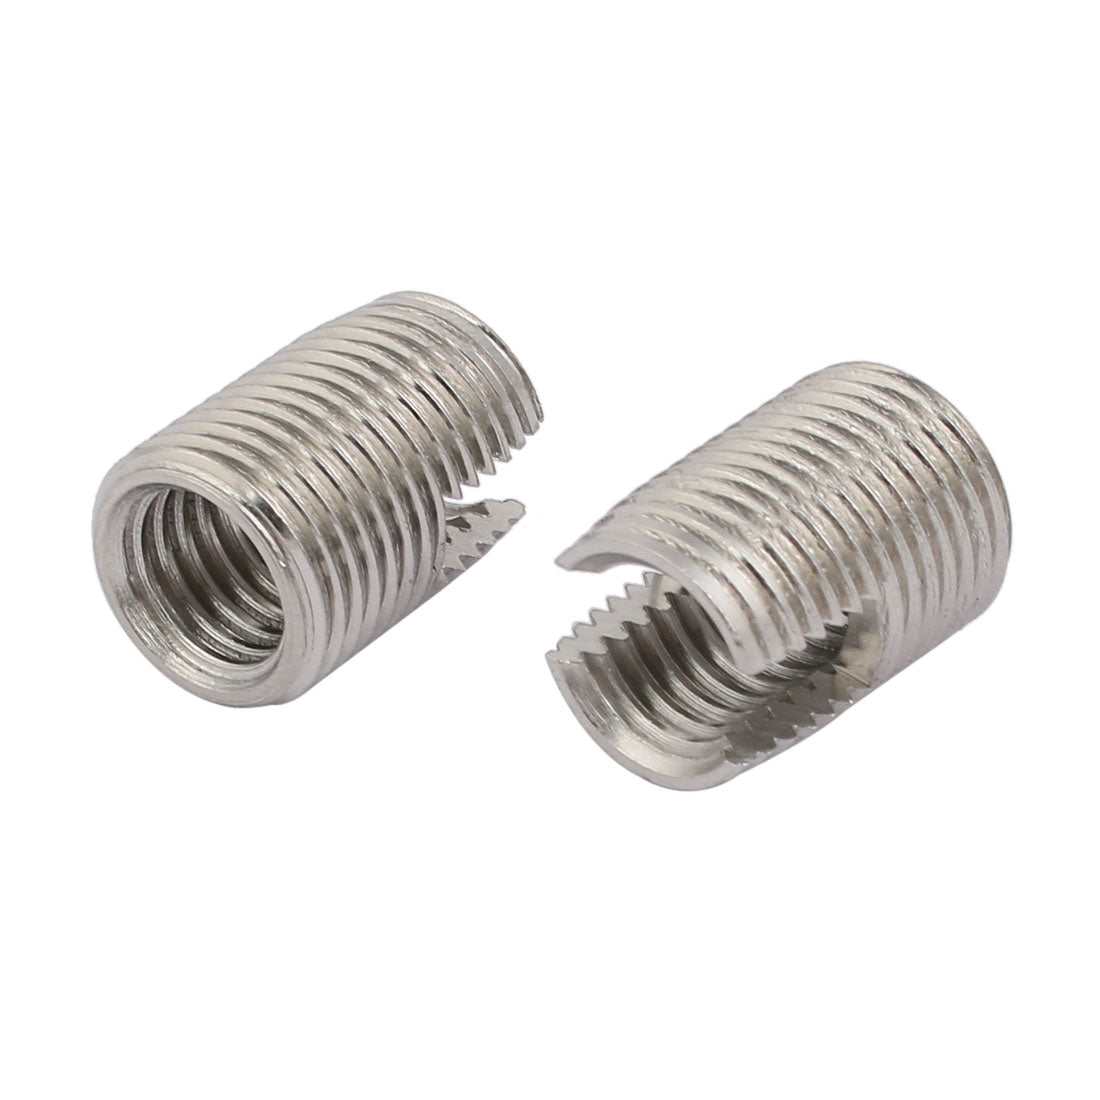 uxcell Uxcell M12x22mm 304 Stainless Steel Self Tapping Slotted Thread Insert 2pcs